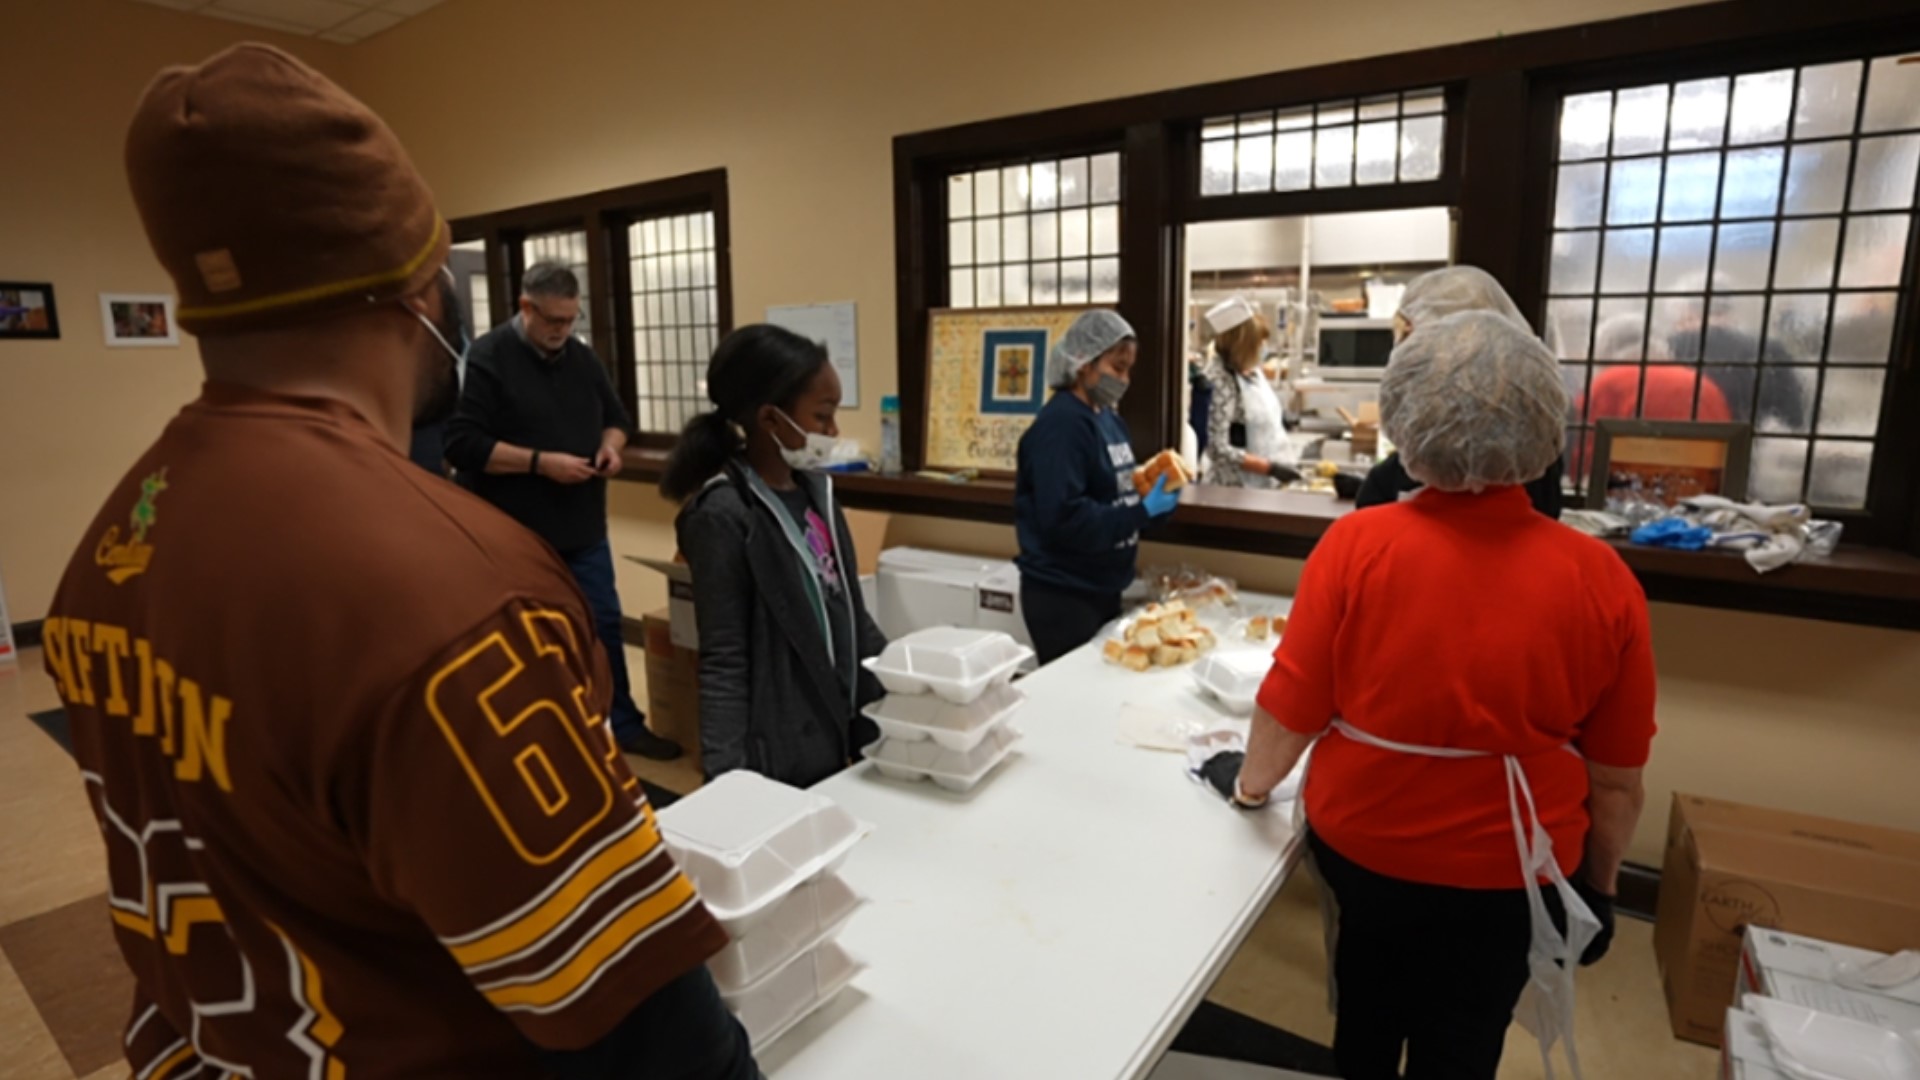 The goal for 2022 is to serve 11,000 meals in Indianapolis.